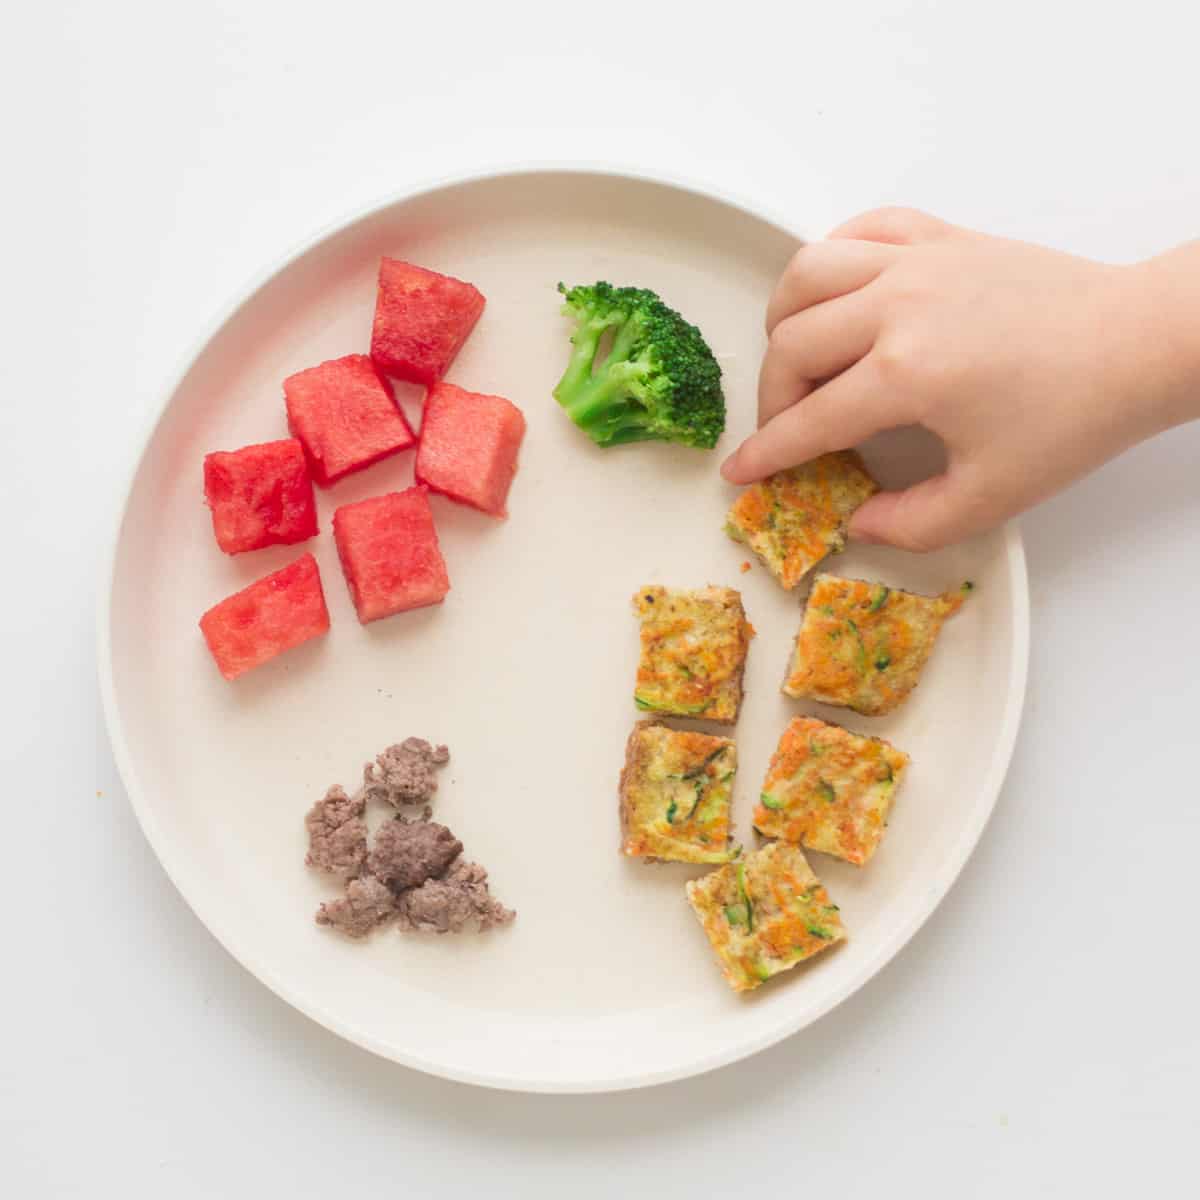 Best Baby Finger Foods - MJ and Hungryman